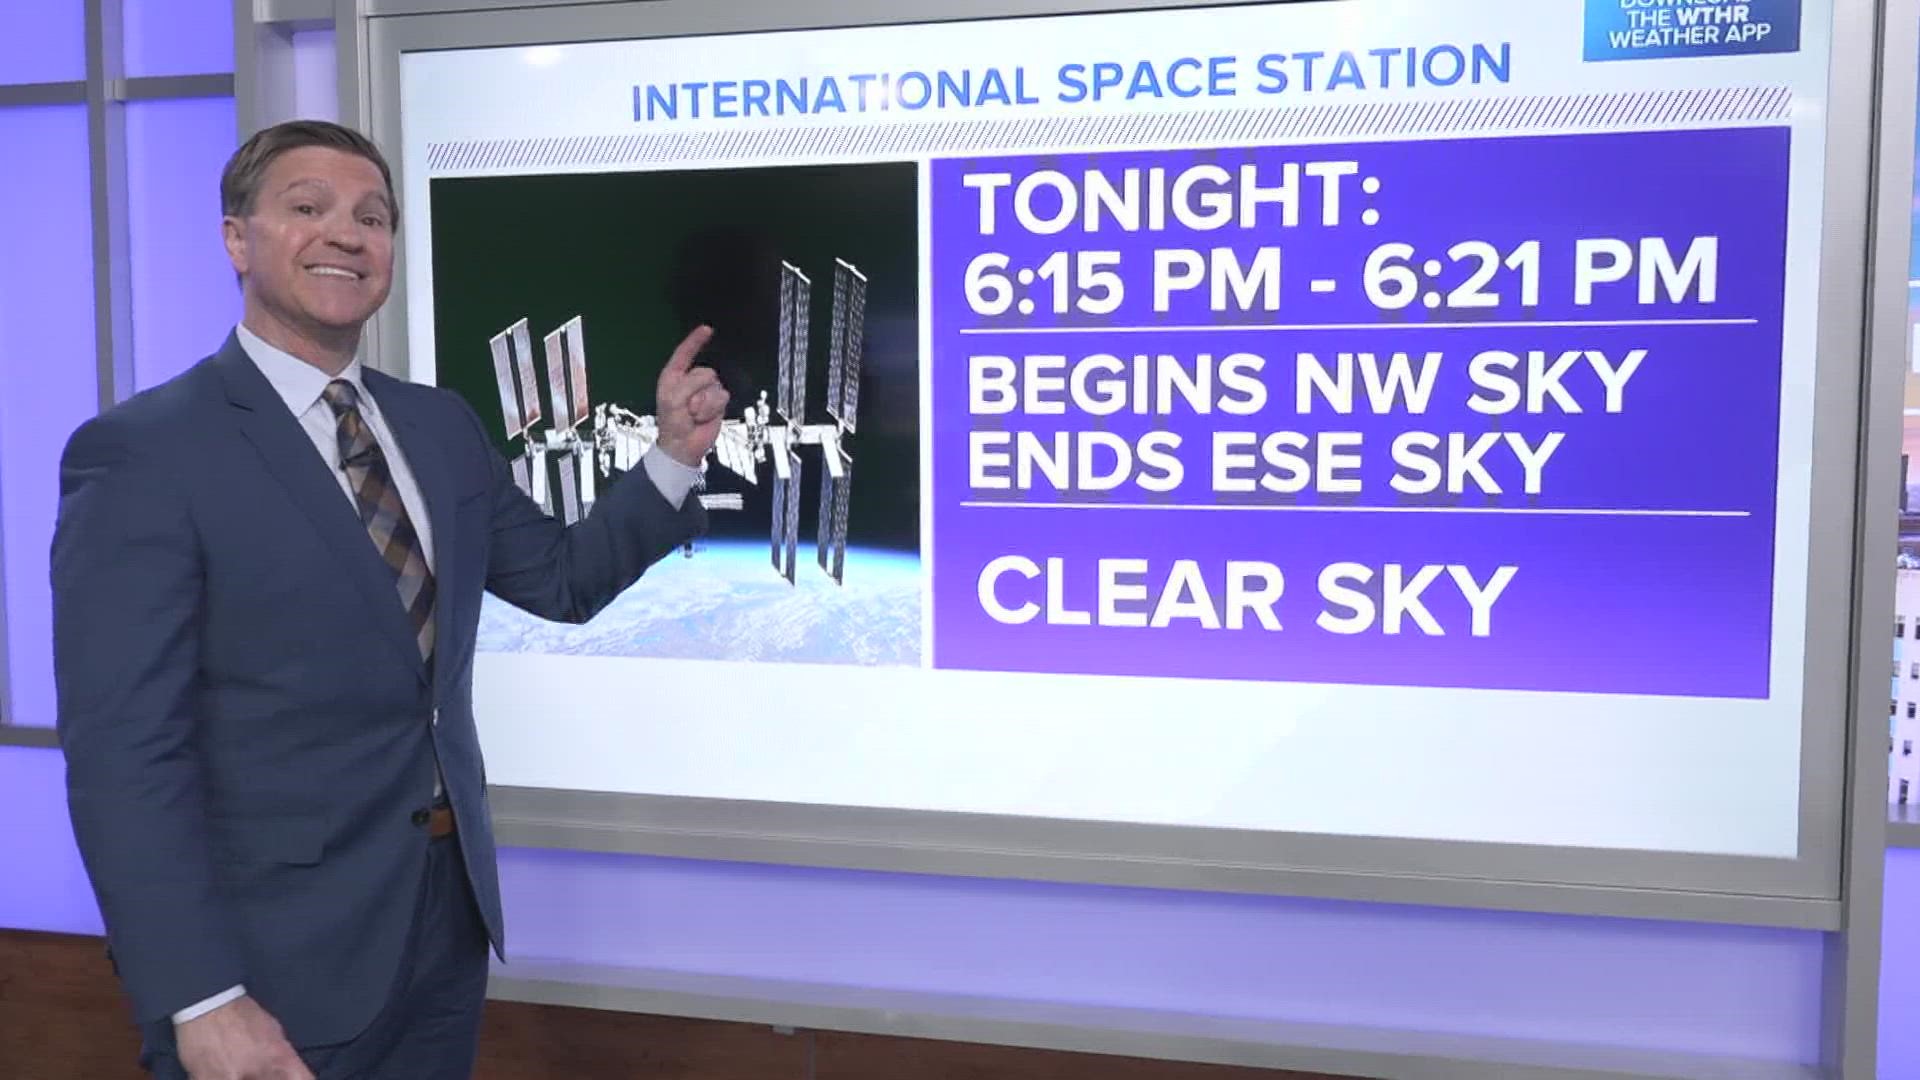 You can get a glimpse of the SpaceX Starlink and International Space station if you look at your window between 6 and 6:40 tonight!